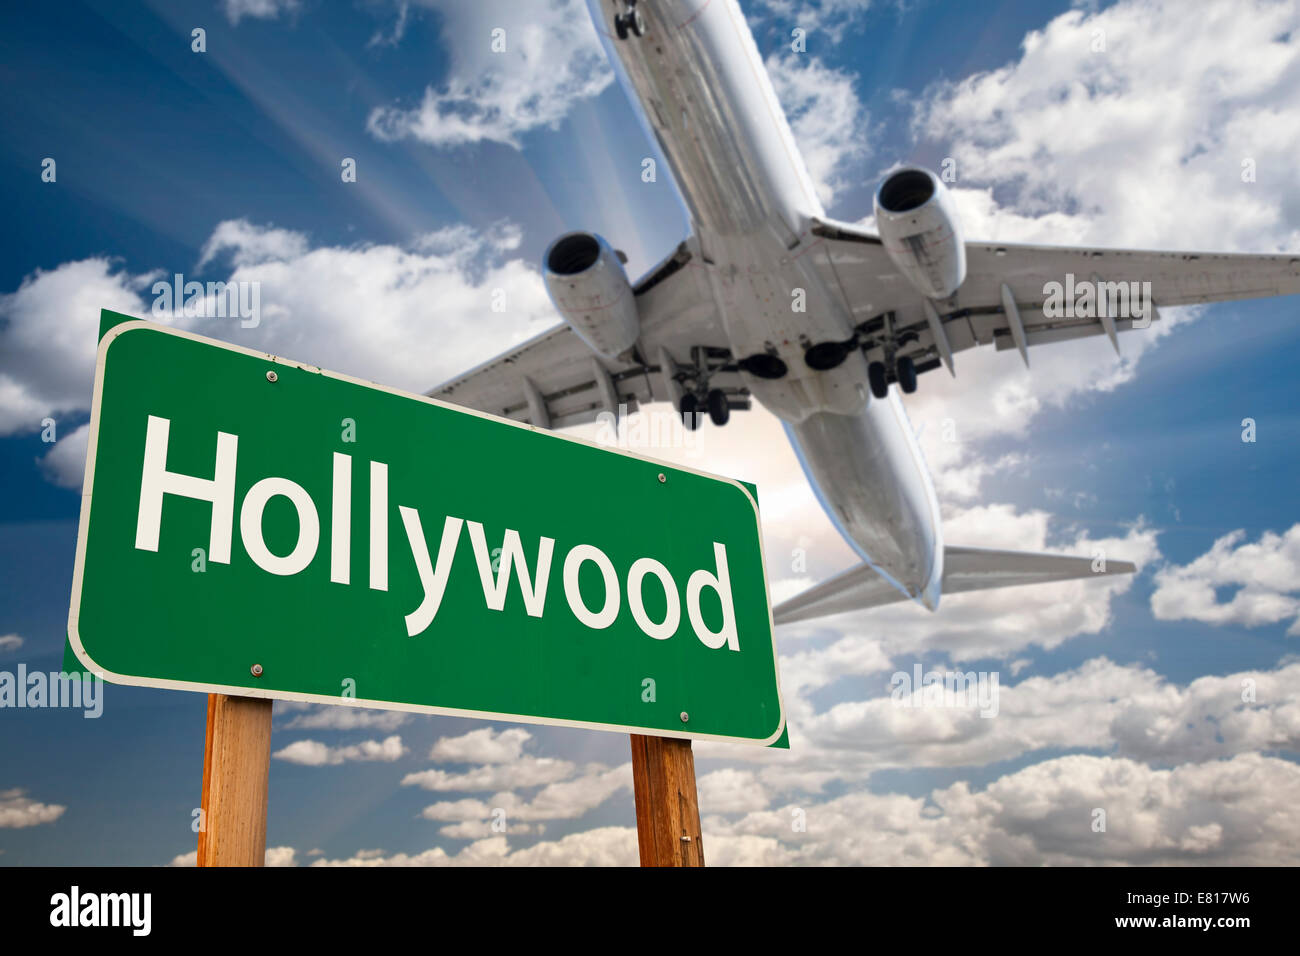 Hollywood Green Road Sign and Airplane Above with Dramatic Blue Sky and Clouds. Stock Photo